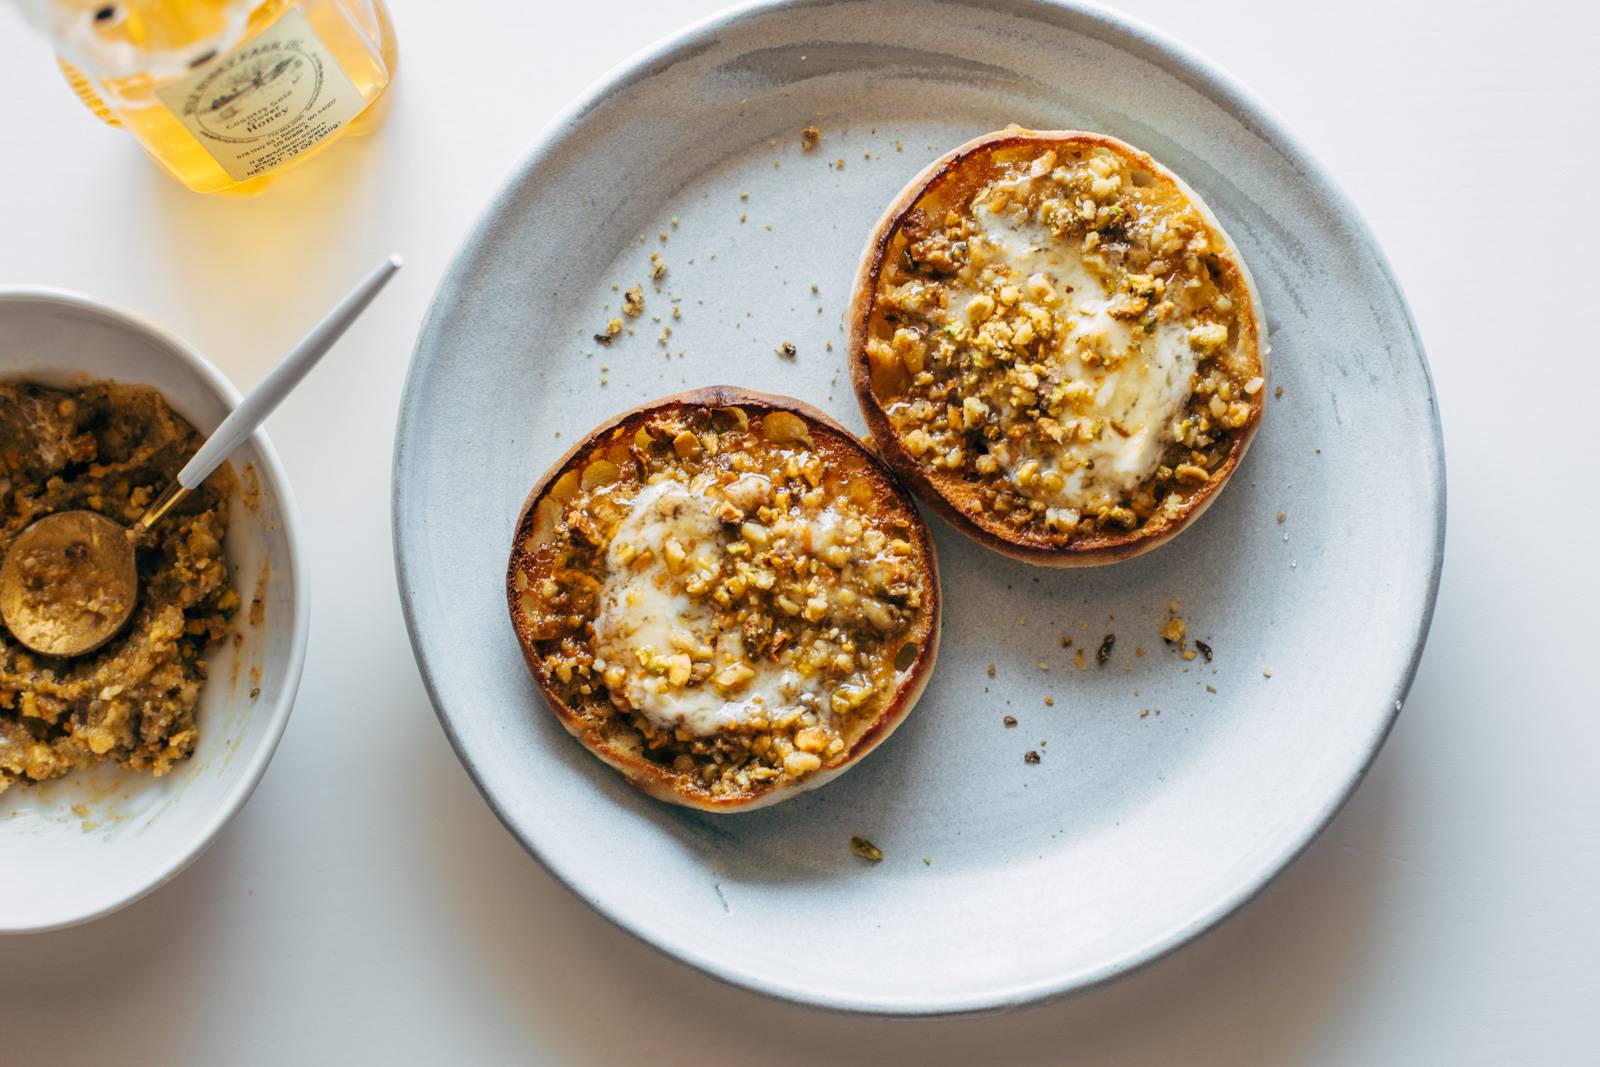 Mascarpone cheese gets spread with nuts and sugar on English muffins